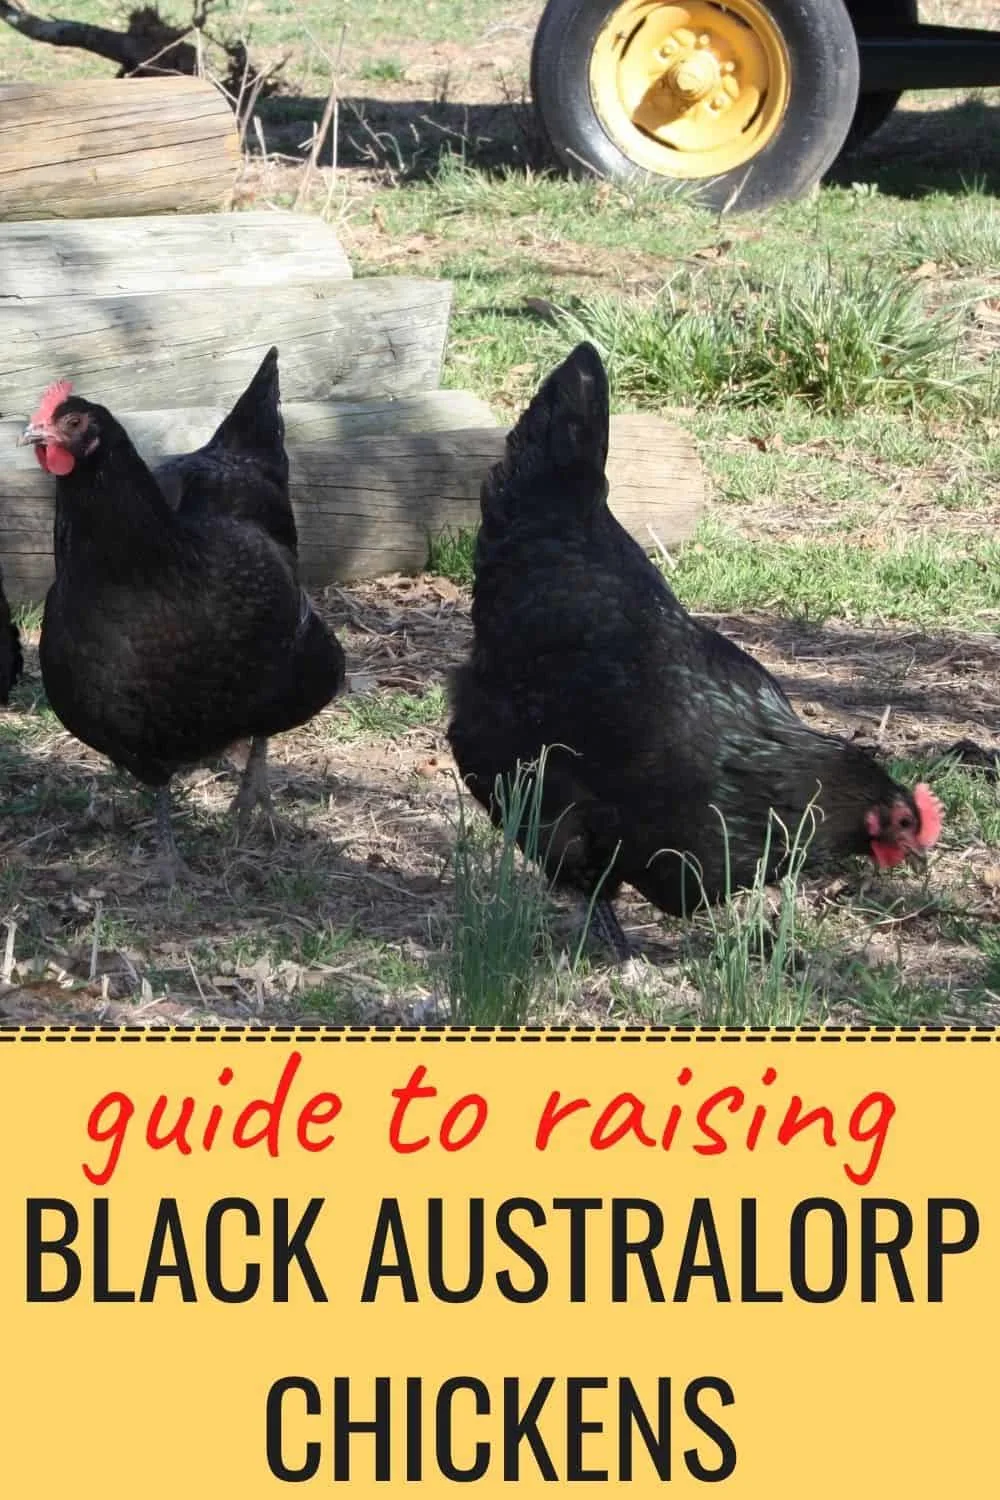 Guide to raising black Australorp chickens